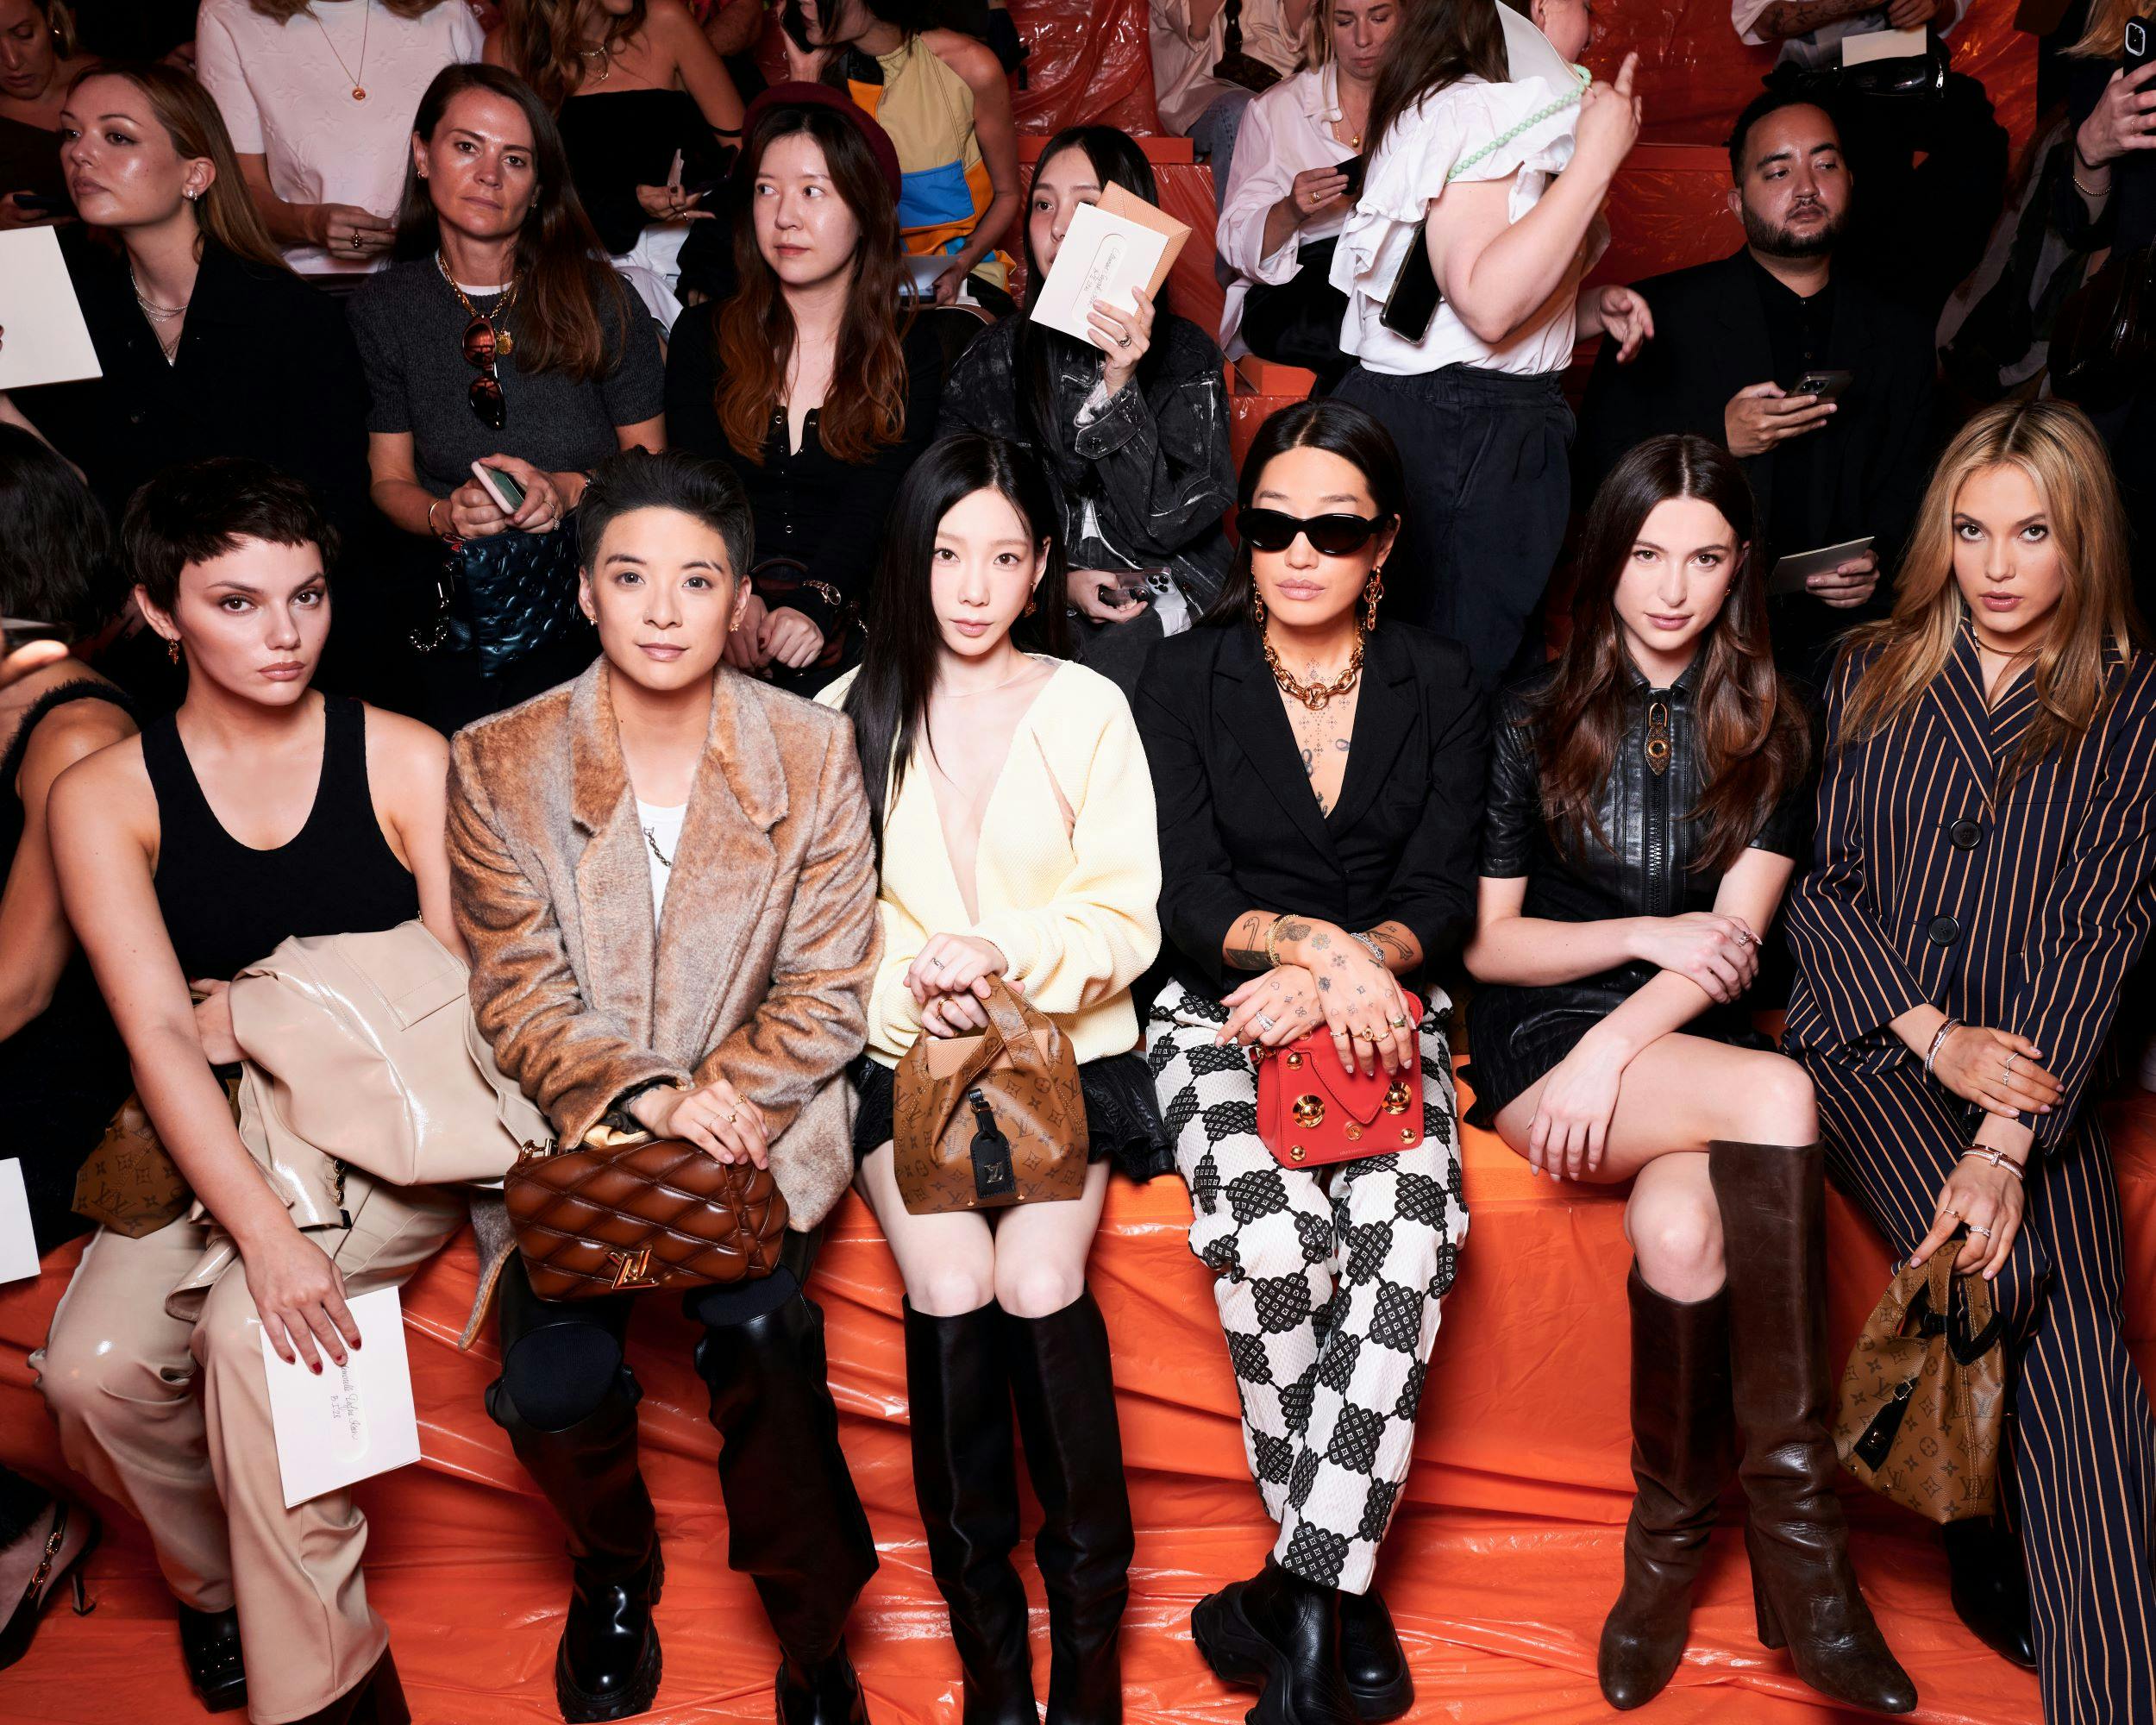 NewJeans — Hyein at the LV Fashion Week '23 Show in Paris